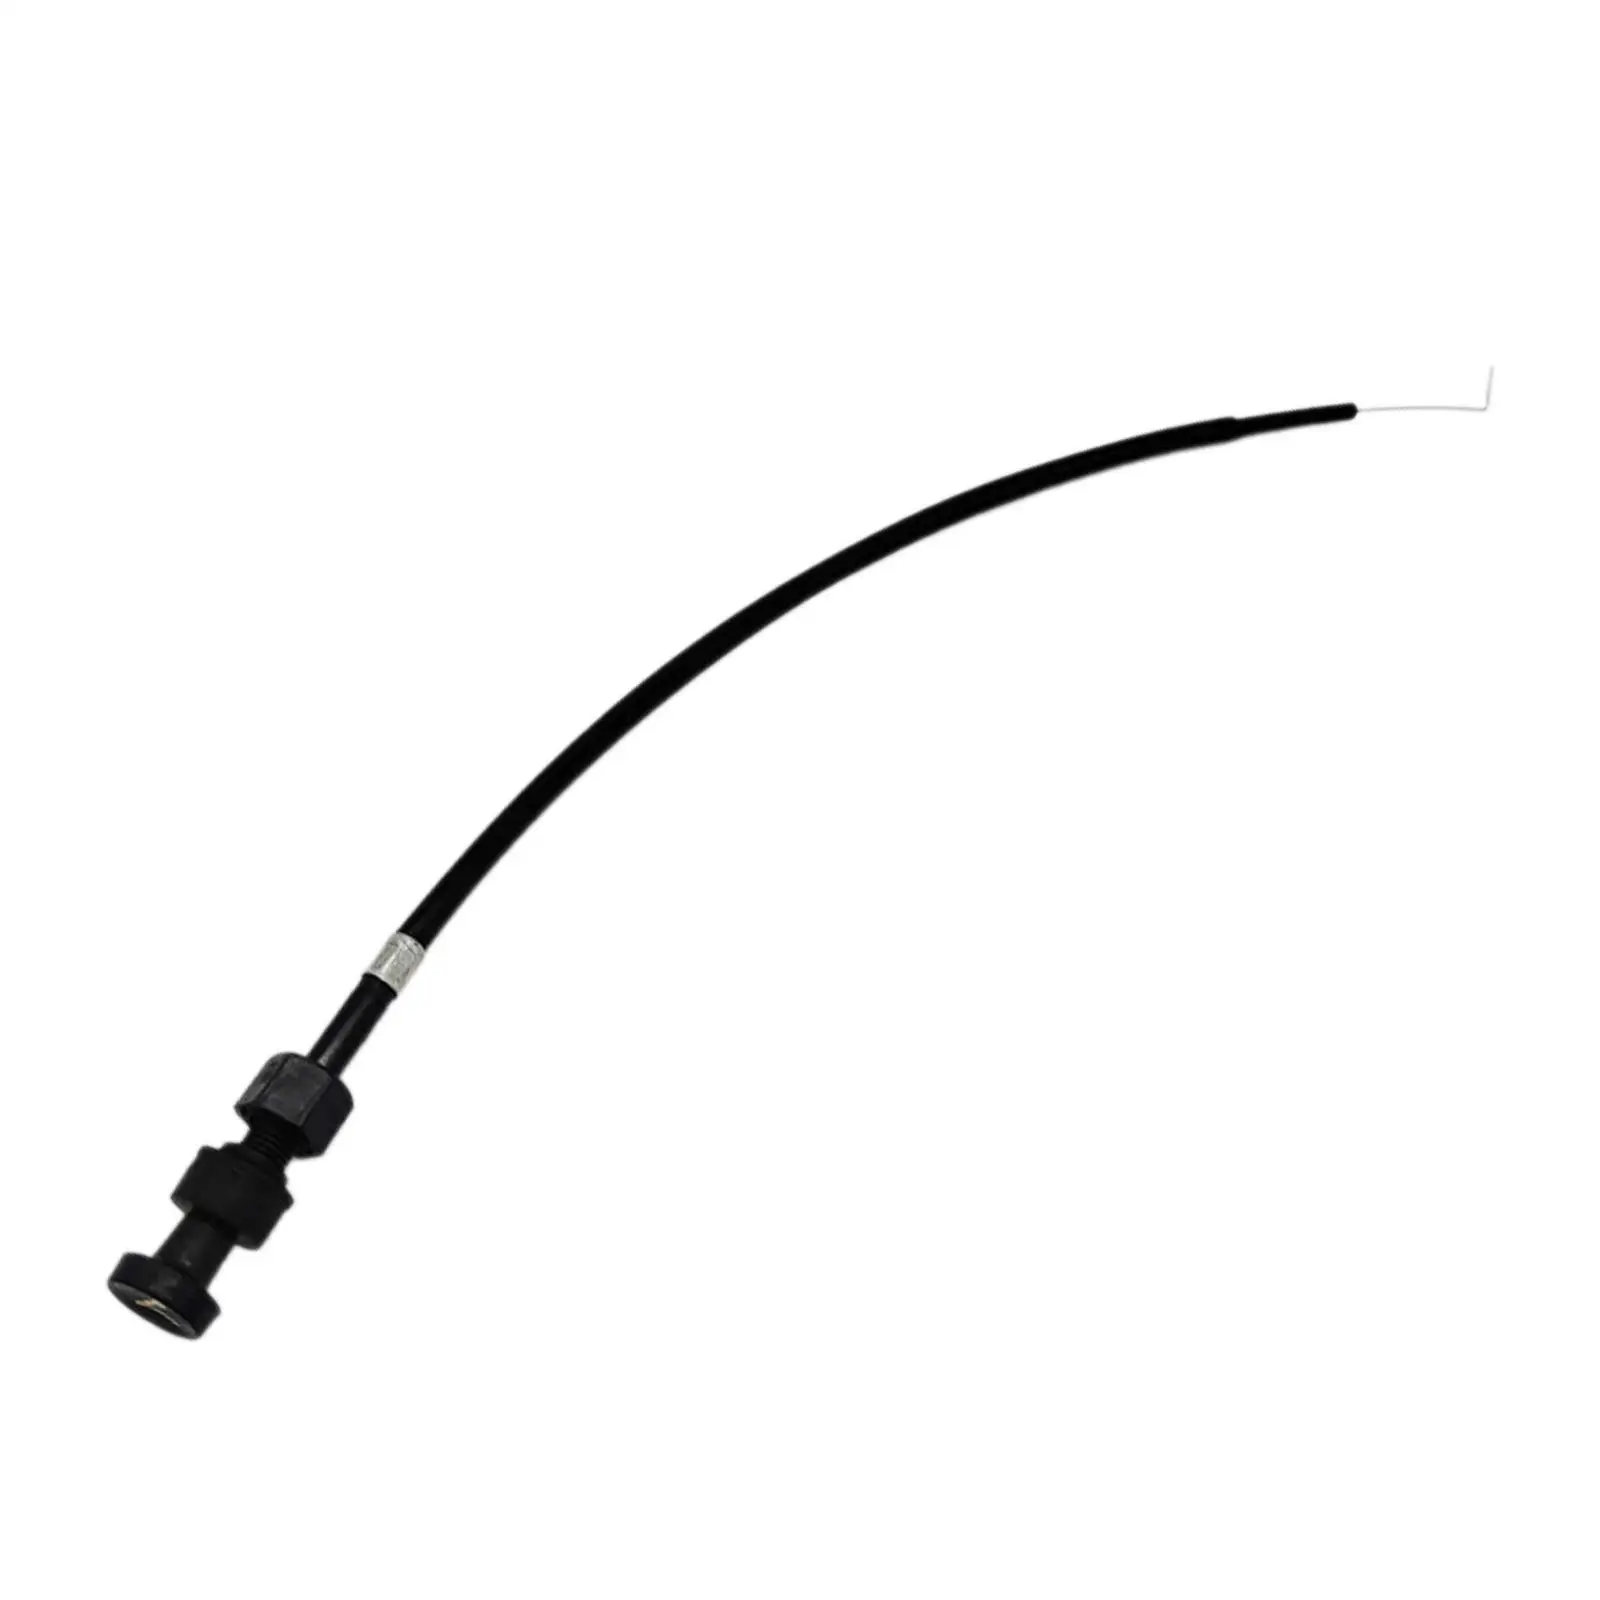 

Choke Cable Carburetor Cable Line 6bx-f6330 Replaces Spare Parts High Performance Metal Accessory Premium for Motor Bike